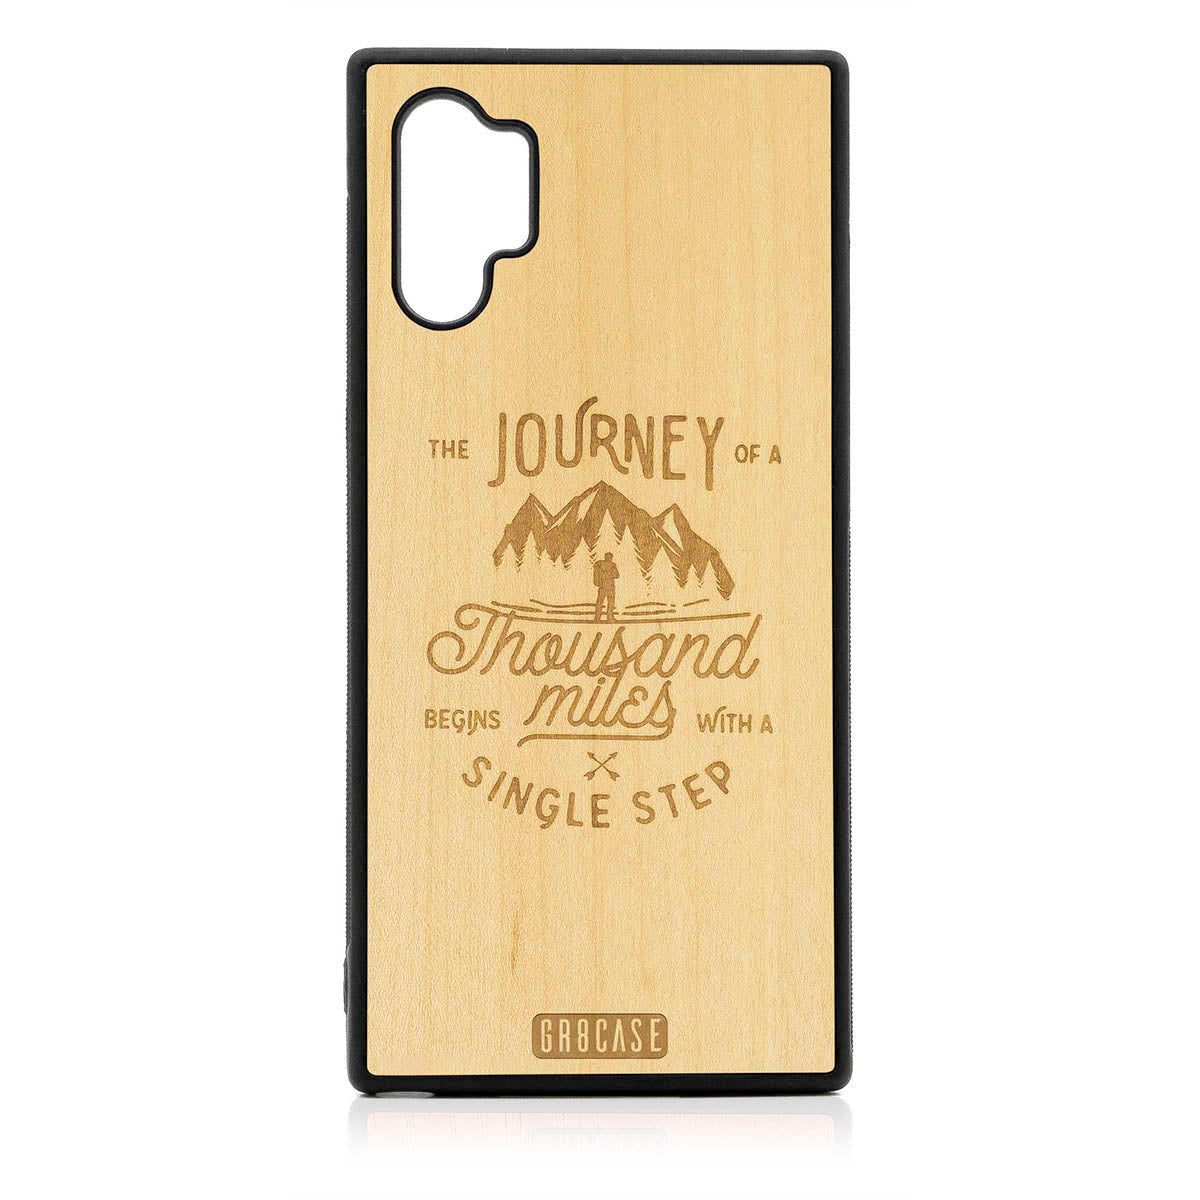 The Journey Of A Thousand Miles Begins With A Single Step Design Wood Case For Samsung Galaxy Note 10 Plus